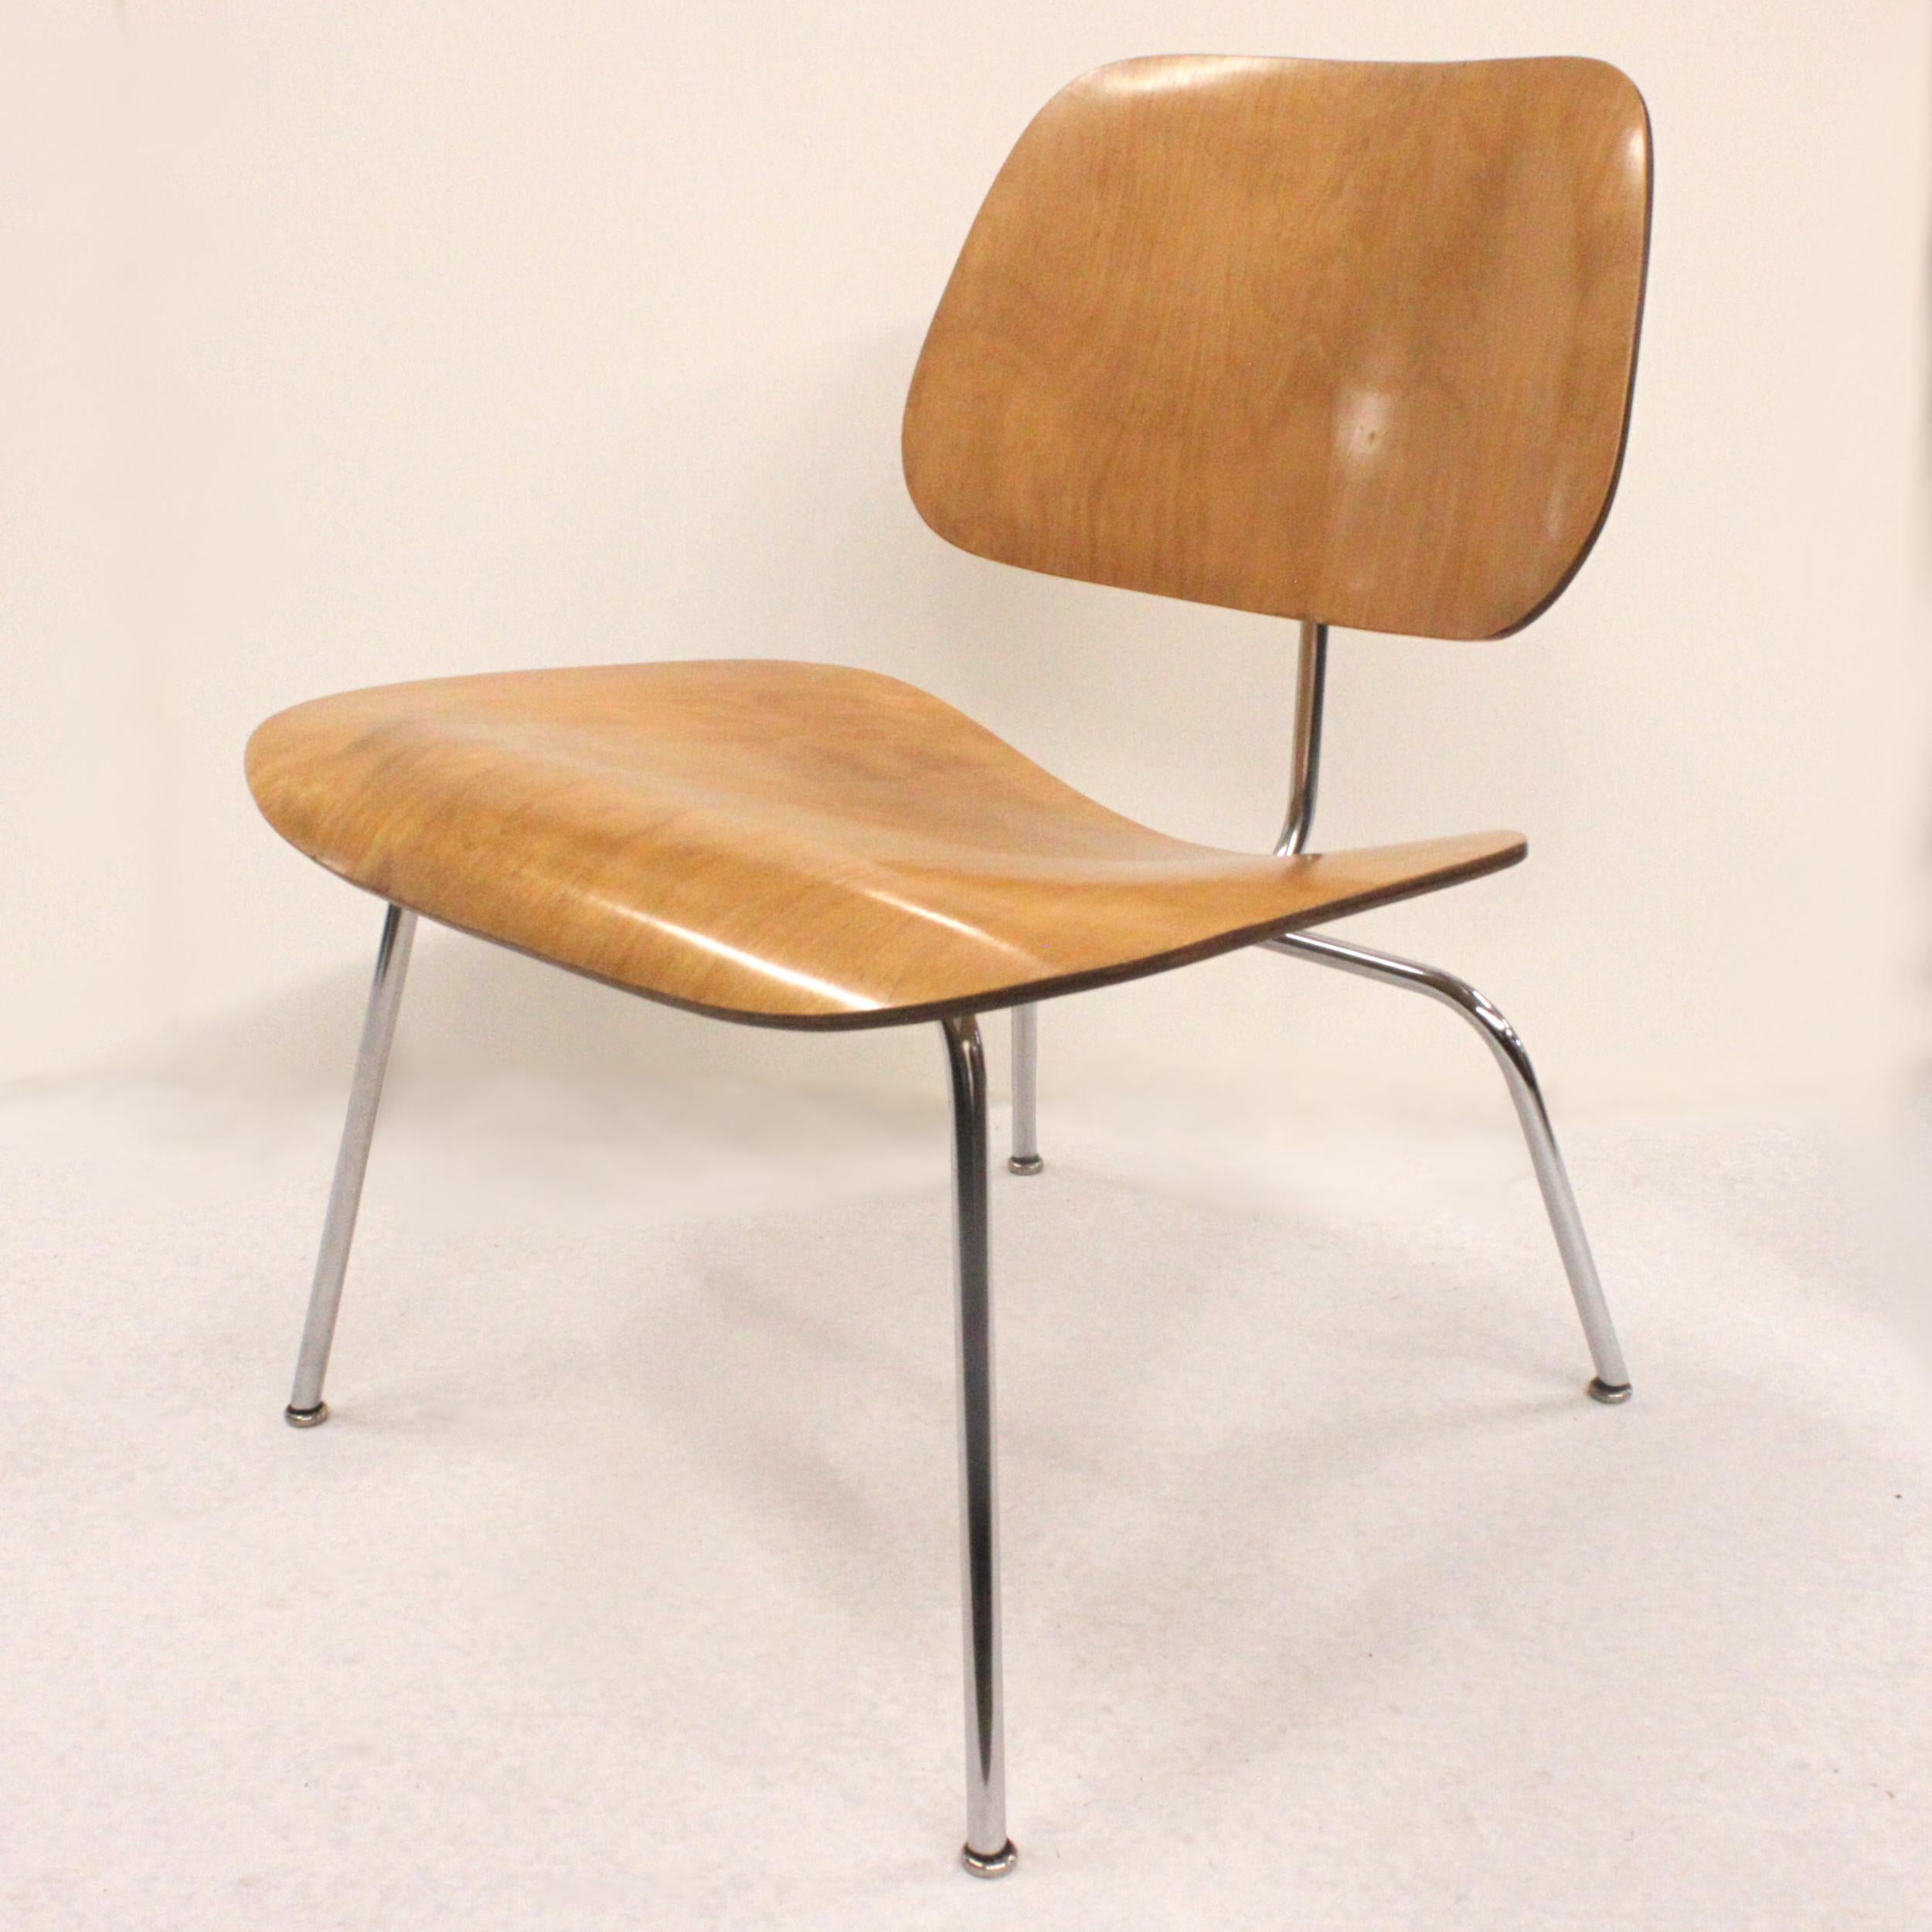 Rare early 1950s LCM lounge chair by Charles Eames for Herman Miller. Chair features bent birch plywood seat/back and chrome steel frame. Both plywood and chrome frame are in excellent original condition and there is even the original Herman Miller